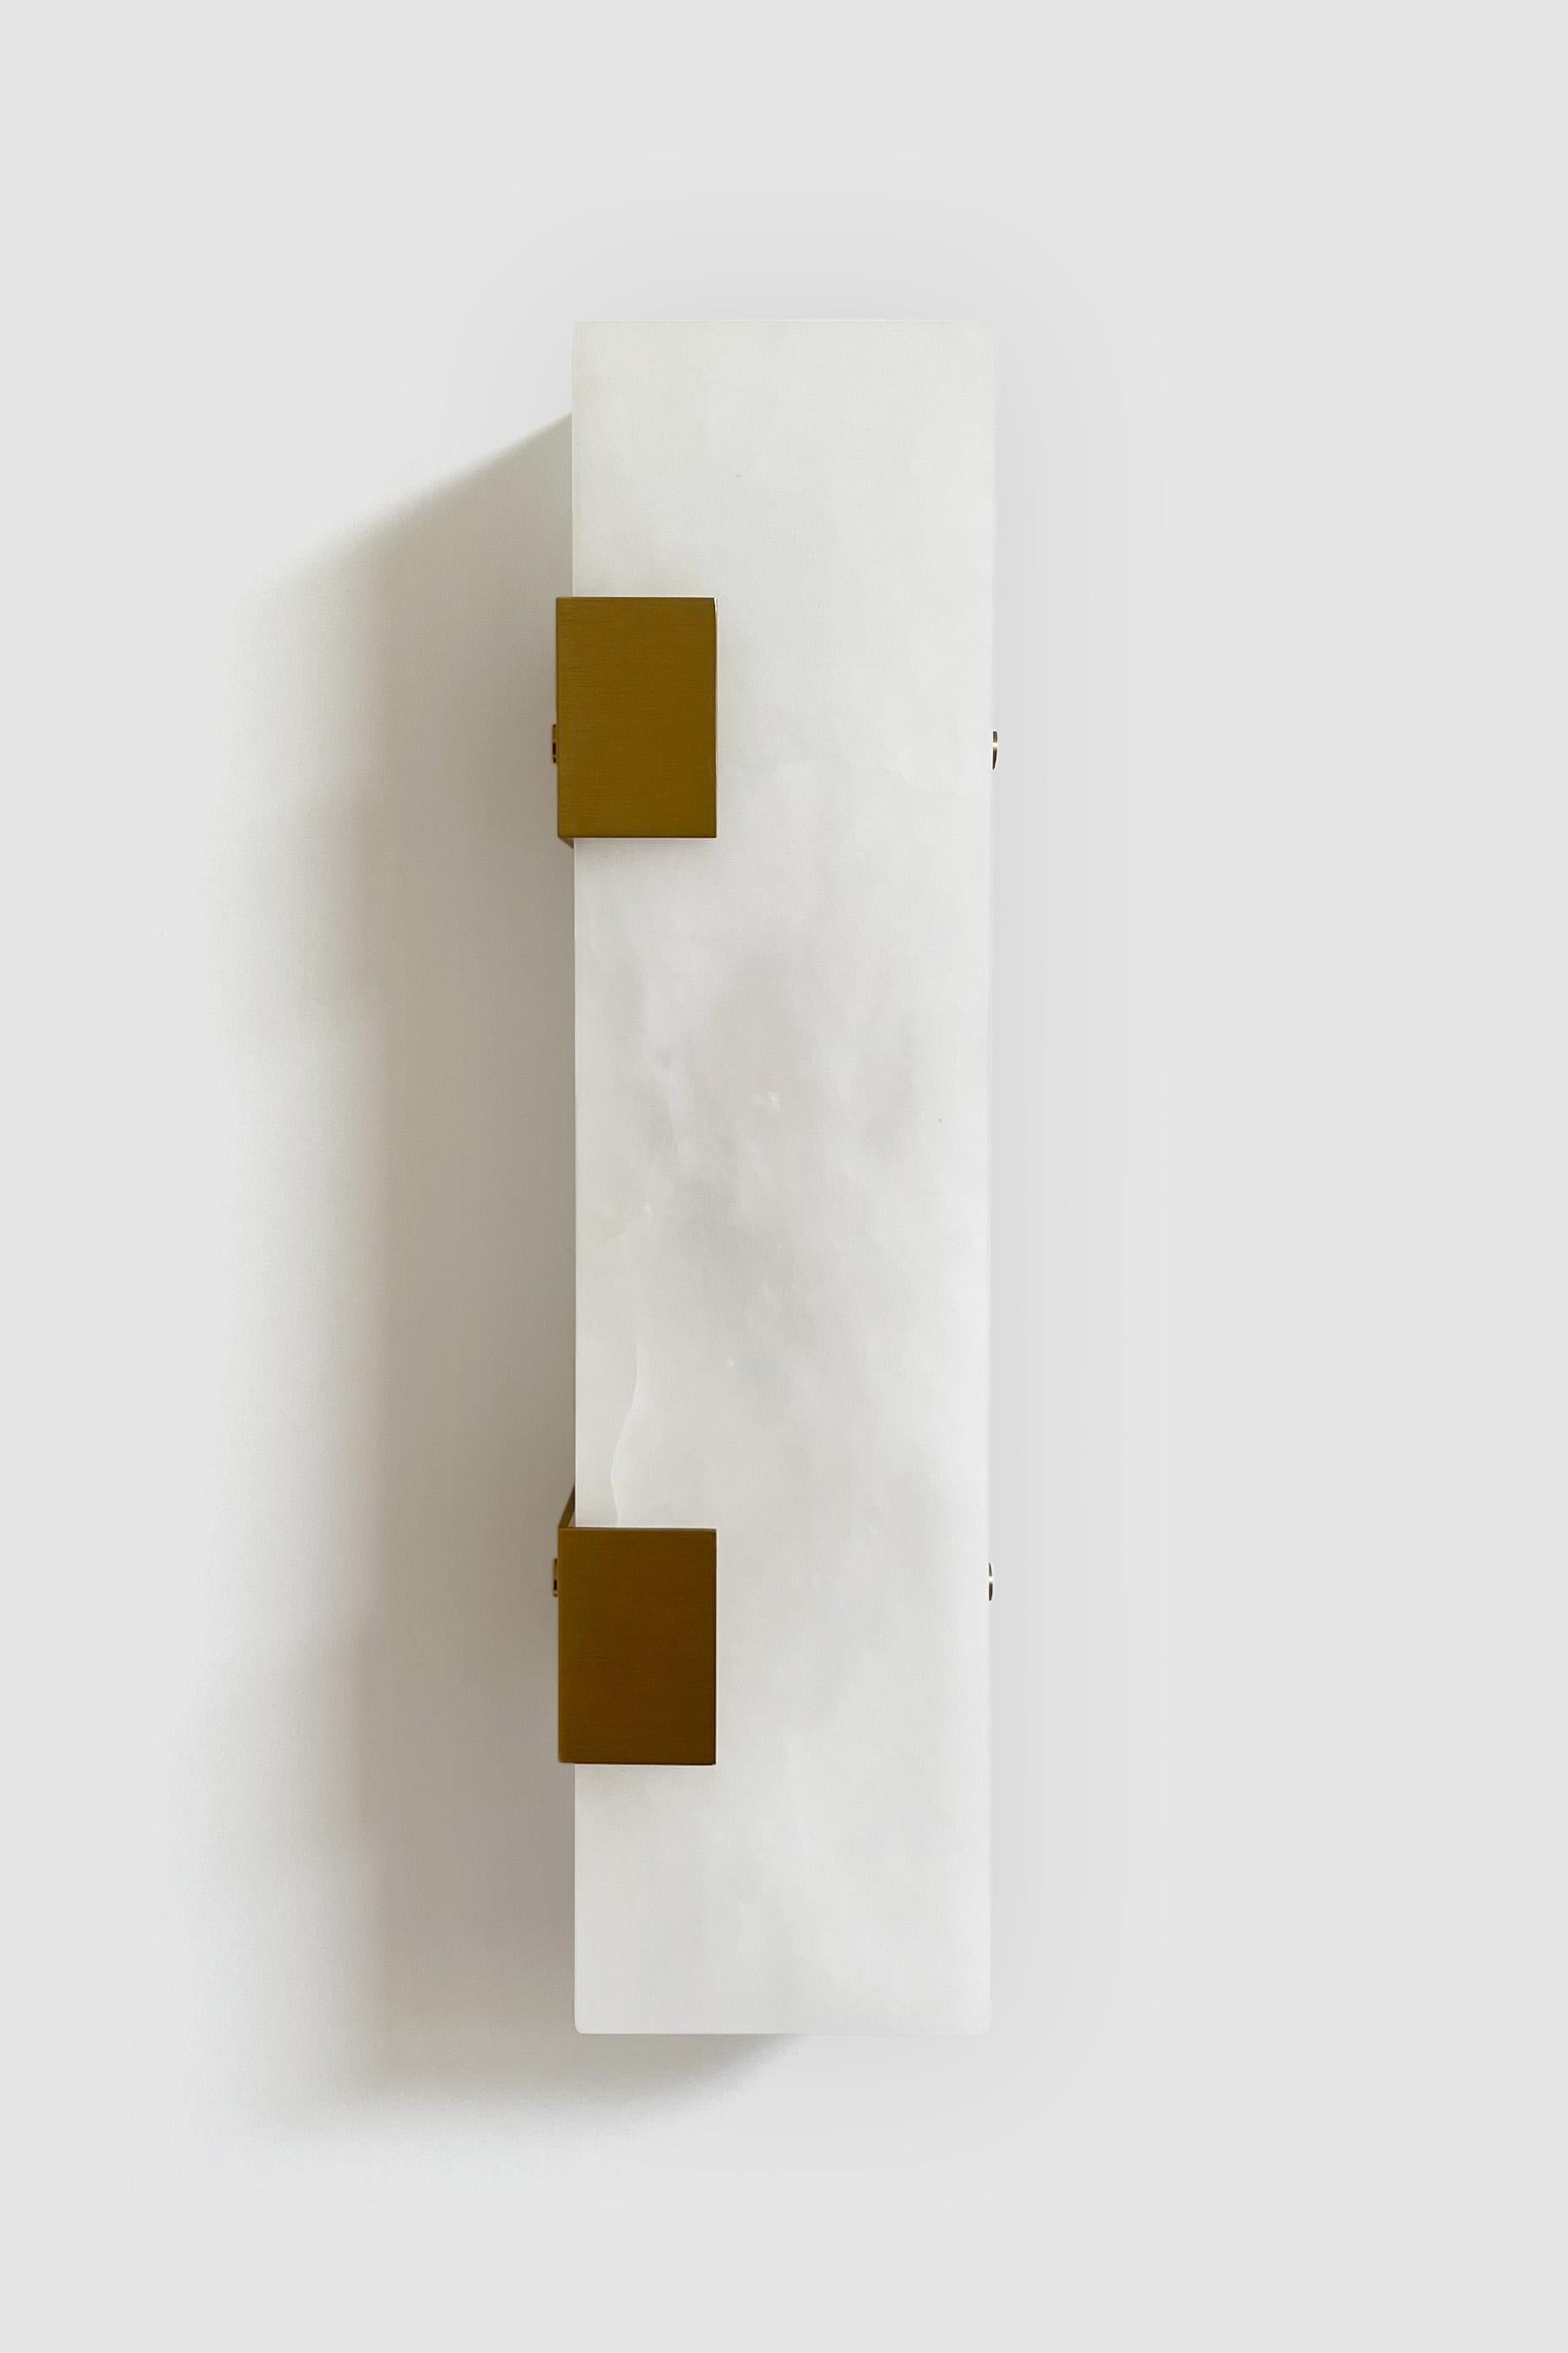 Orphan Work 003-2C Sconce
Shown in brushed brass and alabaster
Available in brushed brass, brushed nickel and blackened brass
Measures: 19” H x 5 1/4” W x 3 7/8” D
Wall or ceiling mount
Vertical or horizontal
Plug-in by request
1-4 adjustable